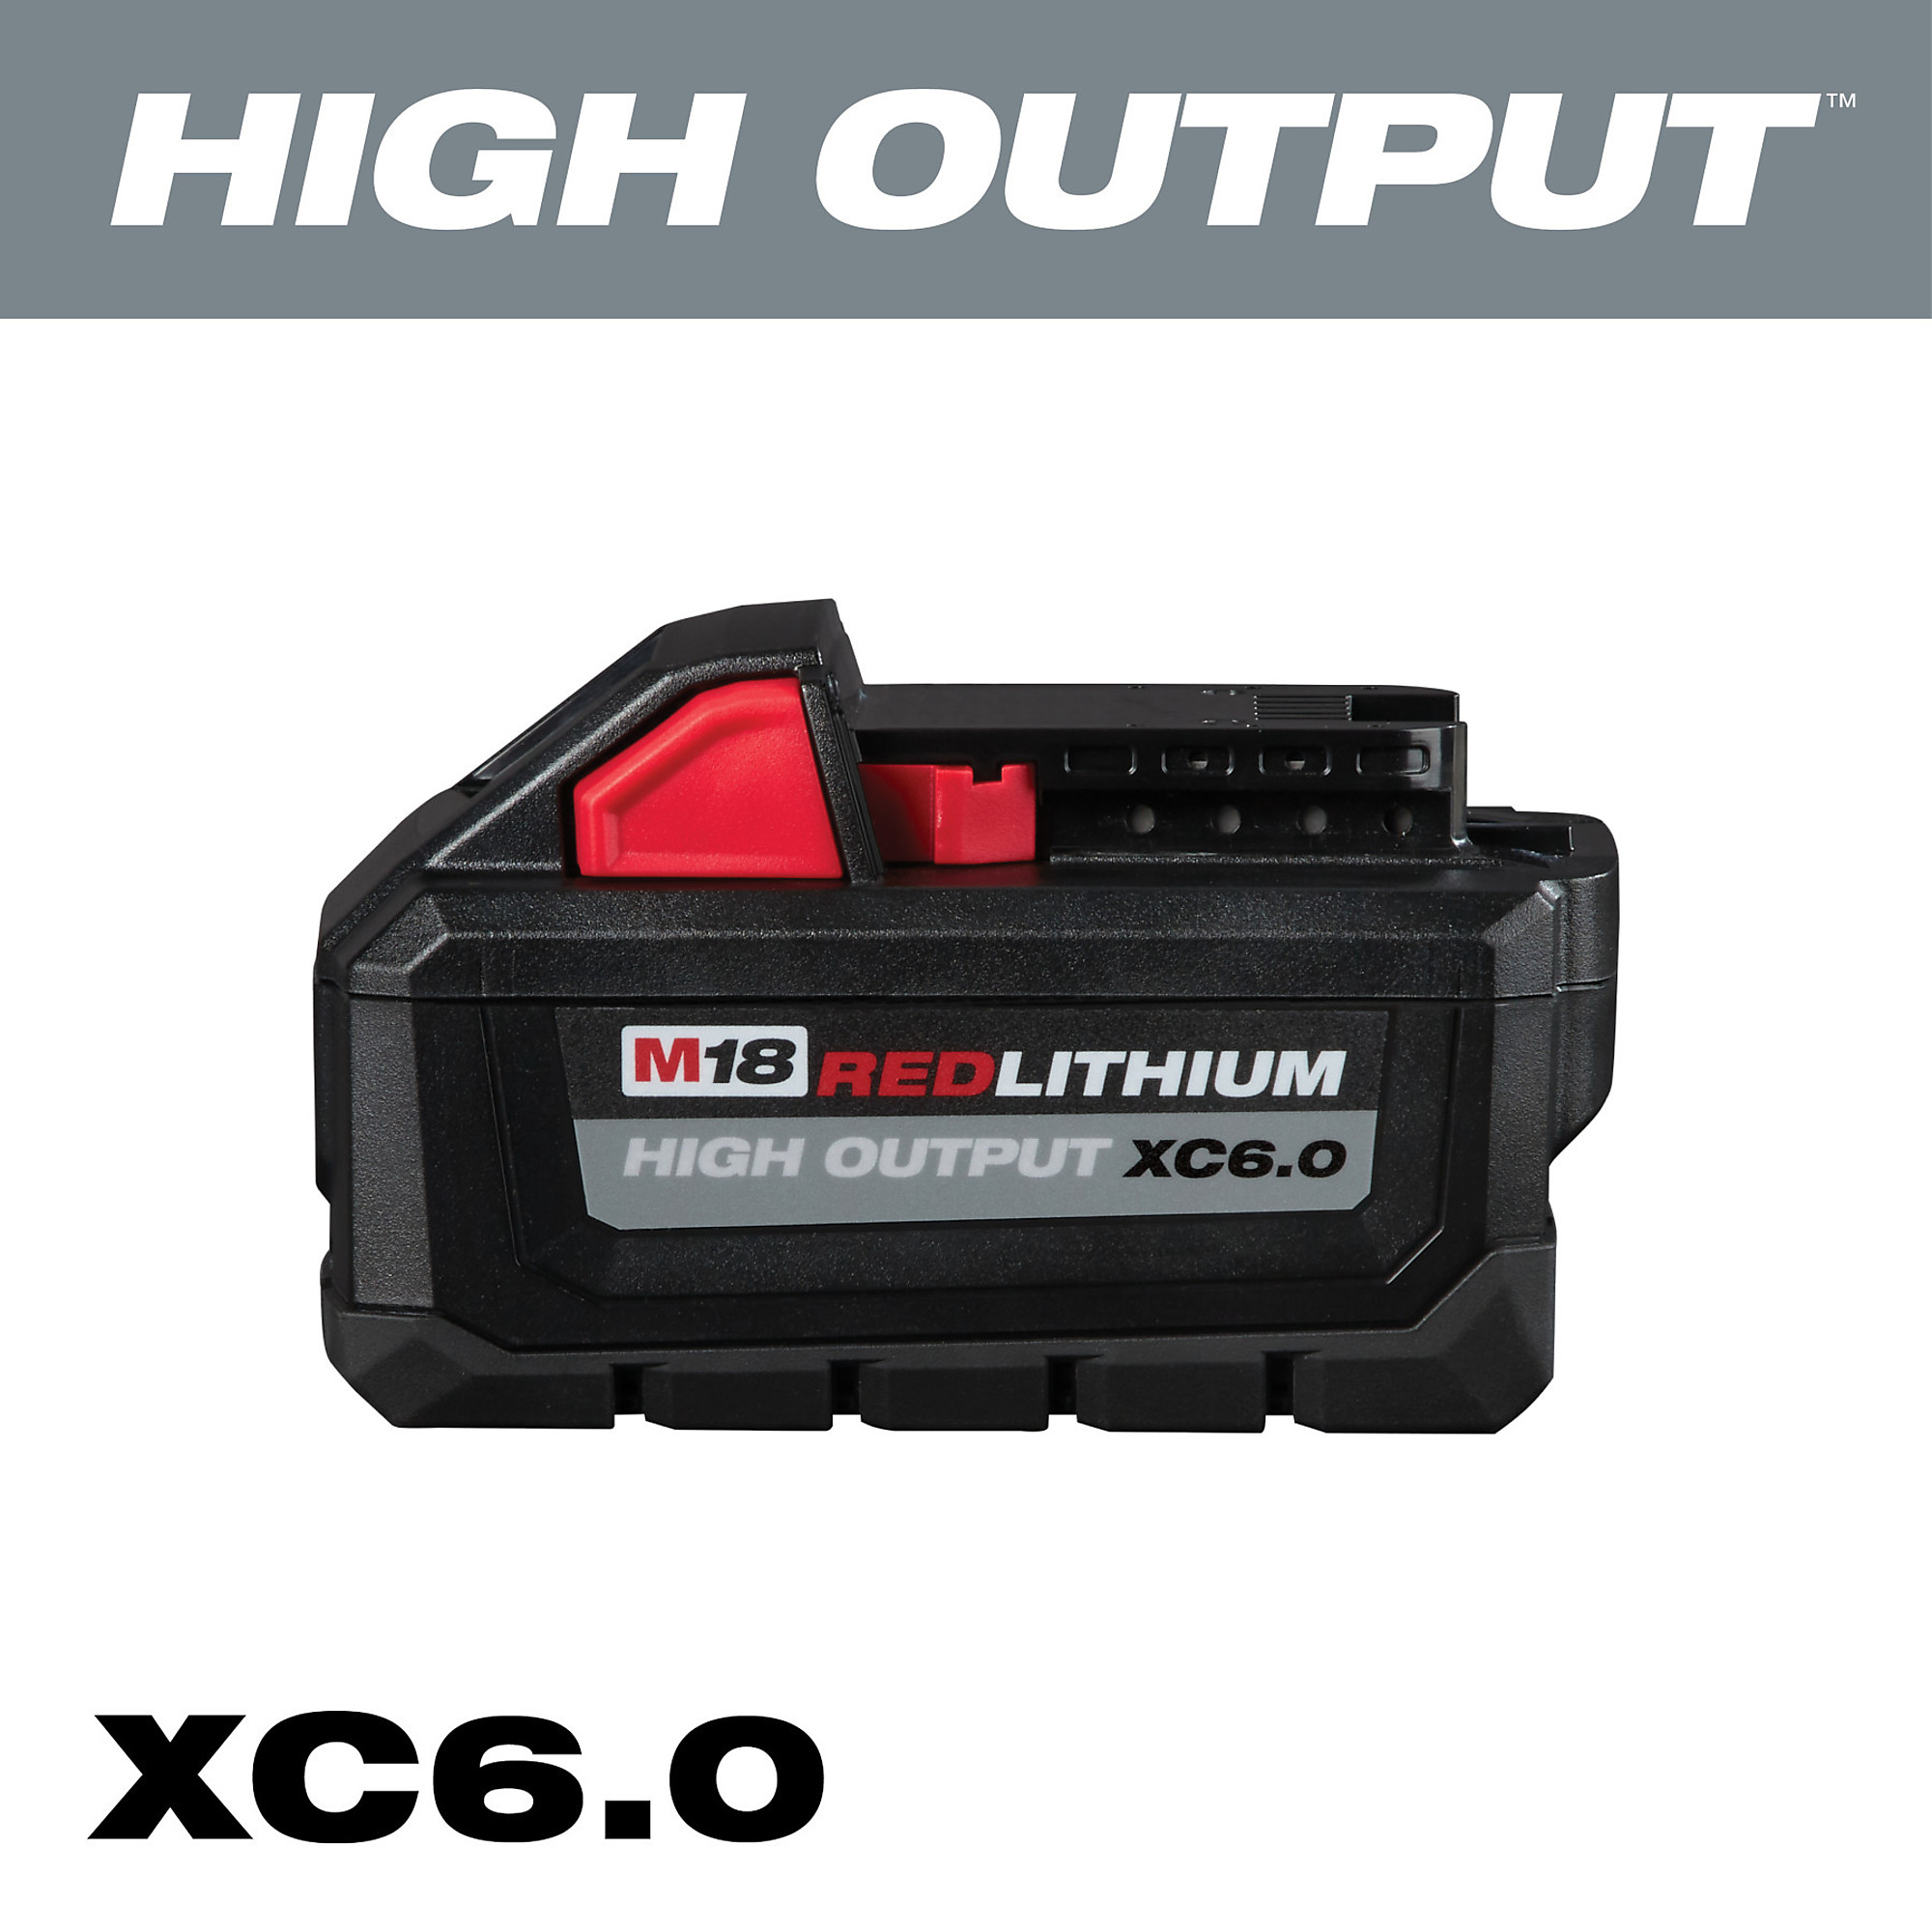 M18 REDLITHIUM High Output XC6.0 Battery Pack — 6.0Ah, Model - Milwaukee 48-11-1865